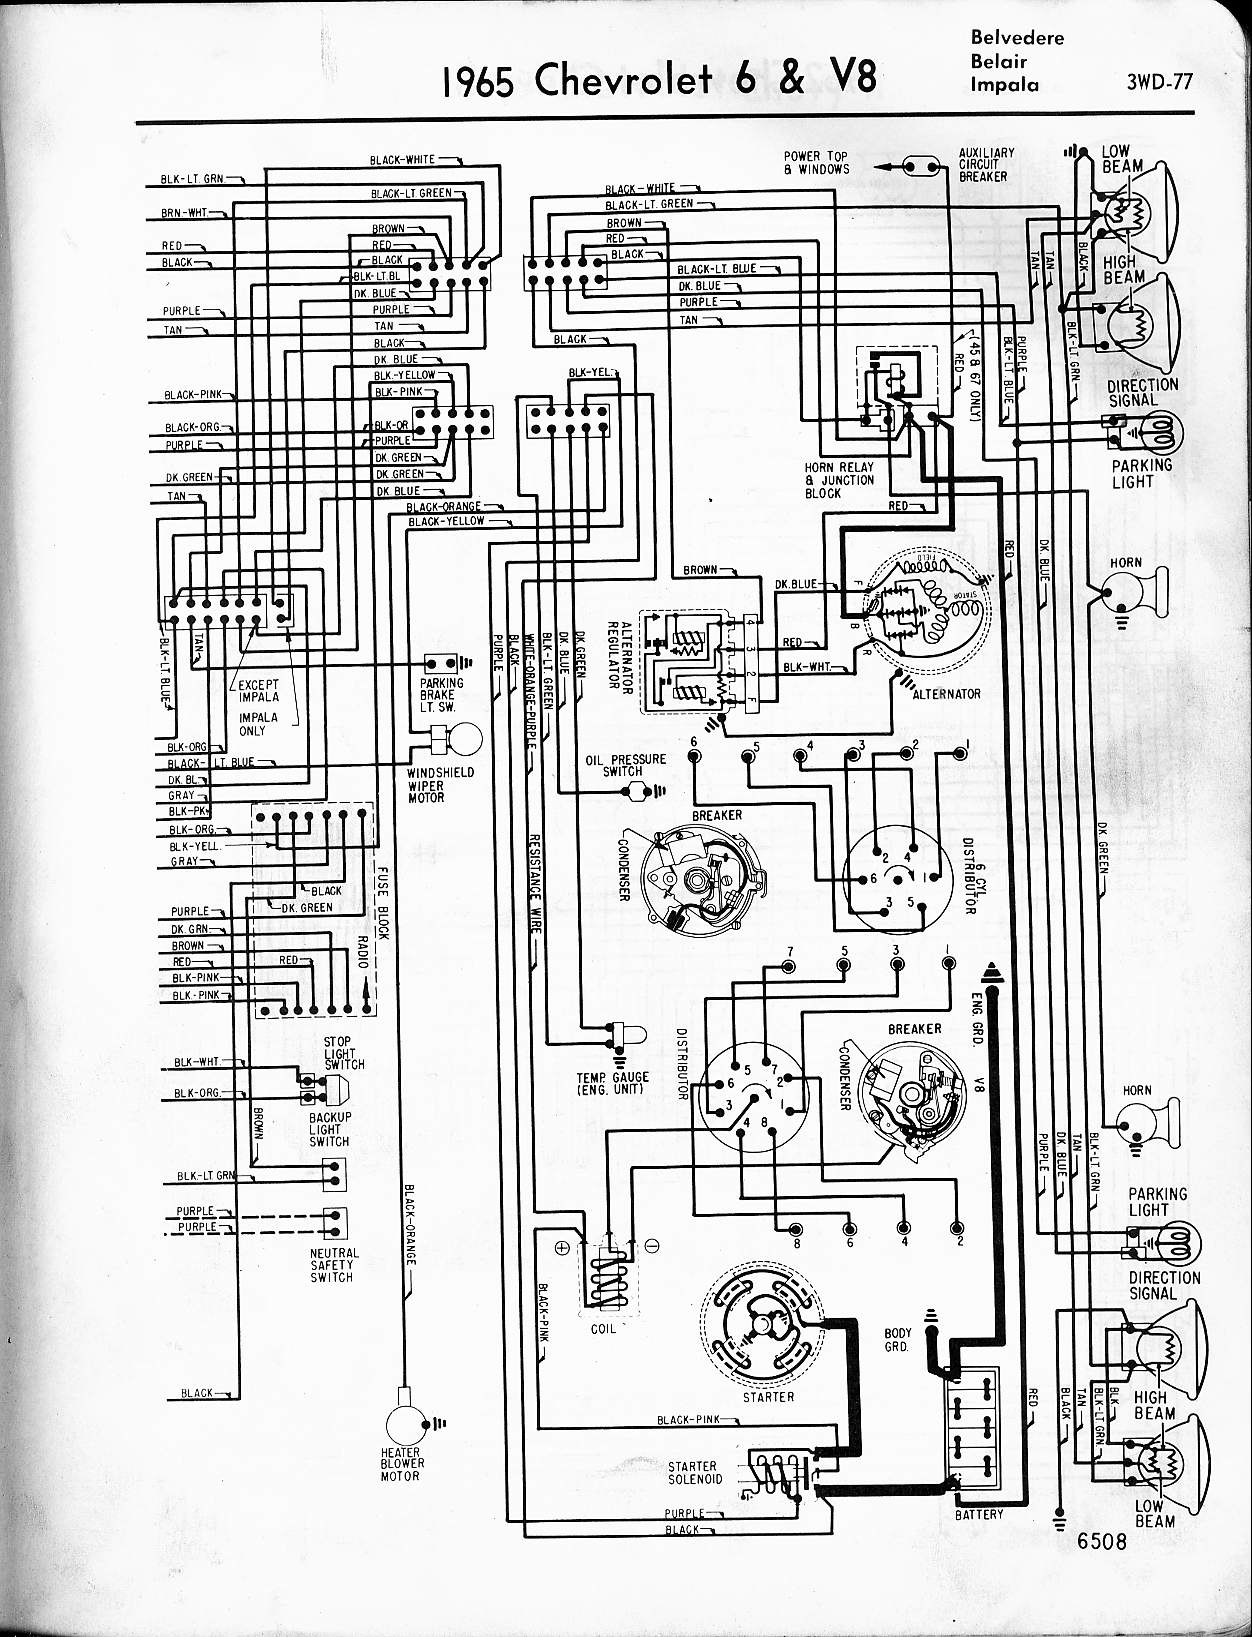 1970 Gmc Truck Wiring Diagram Collection - Wiring Diagram Sample